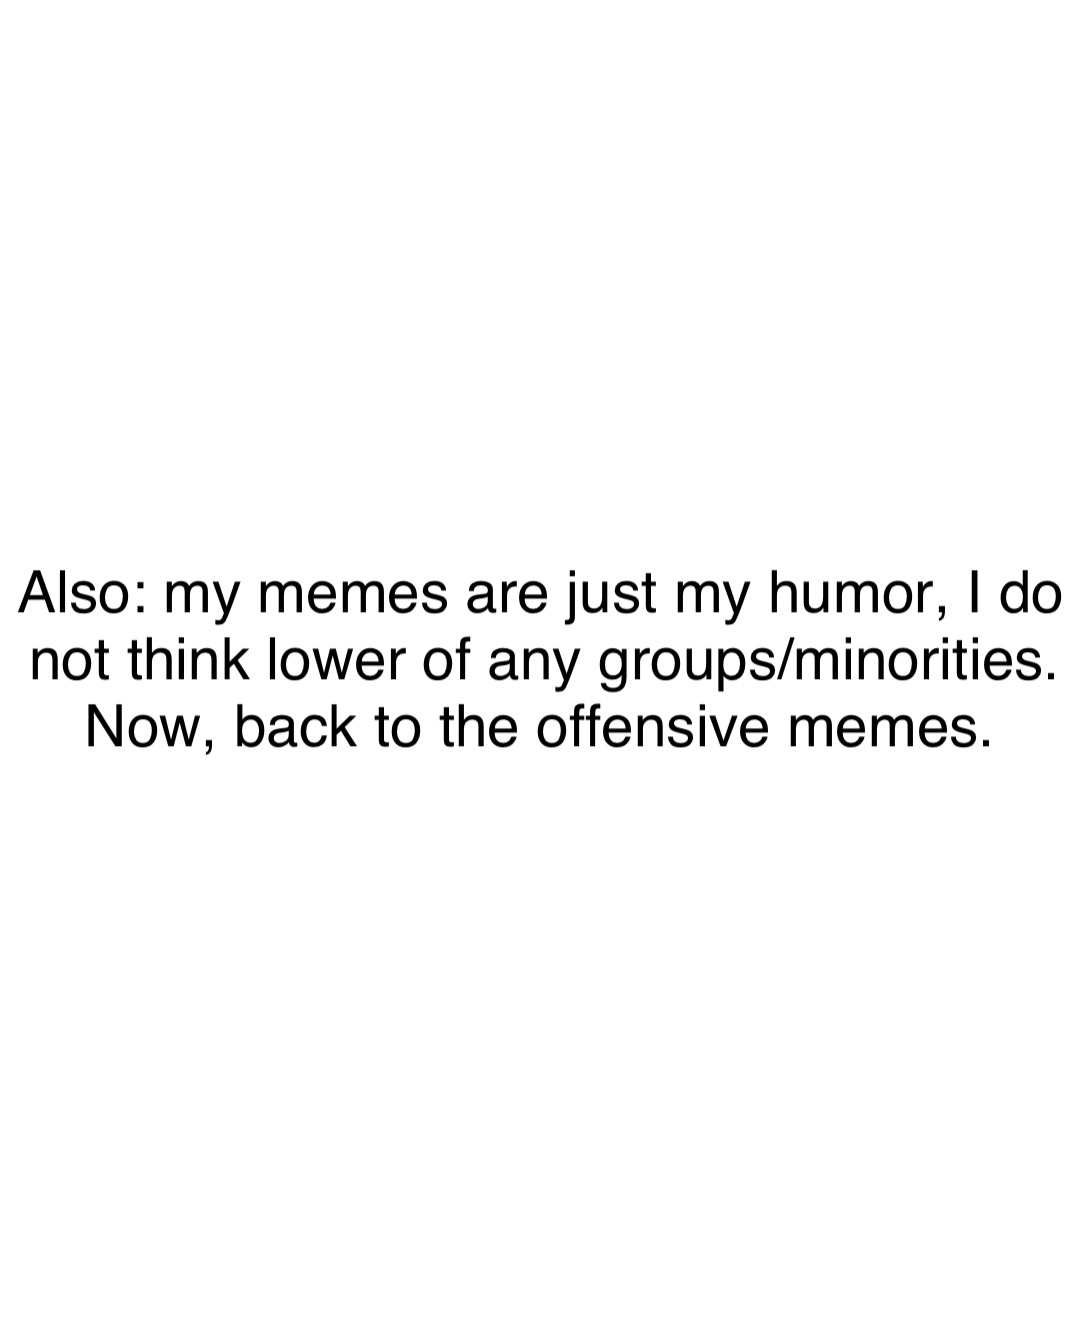 Double tap to edit Also: my memes are just my humor, I do not think lower of any groups/minorities. Now, back to the offensive memes.